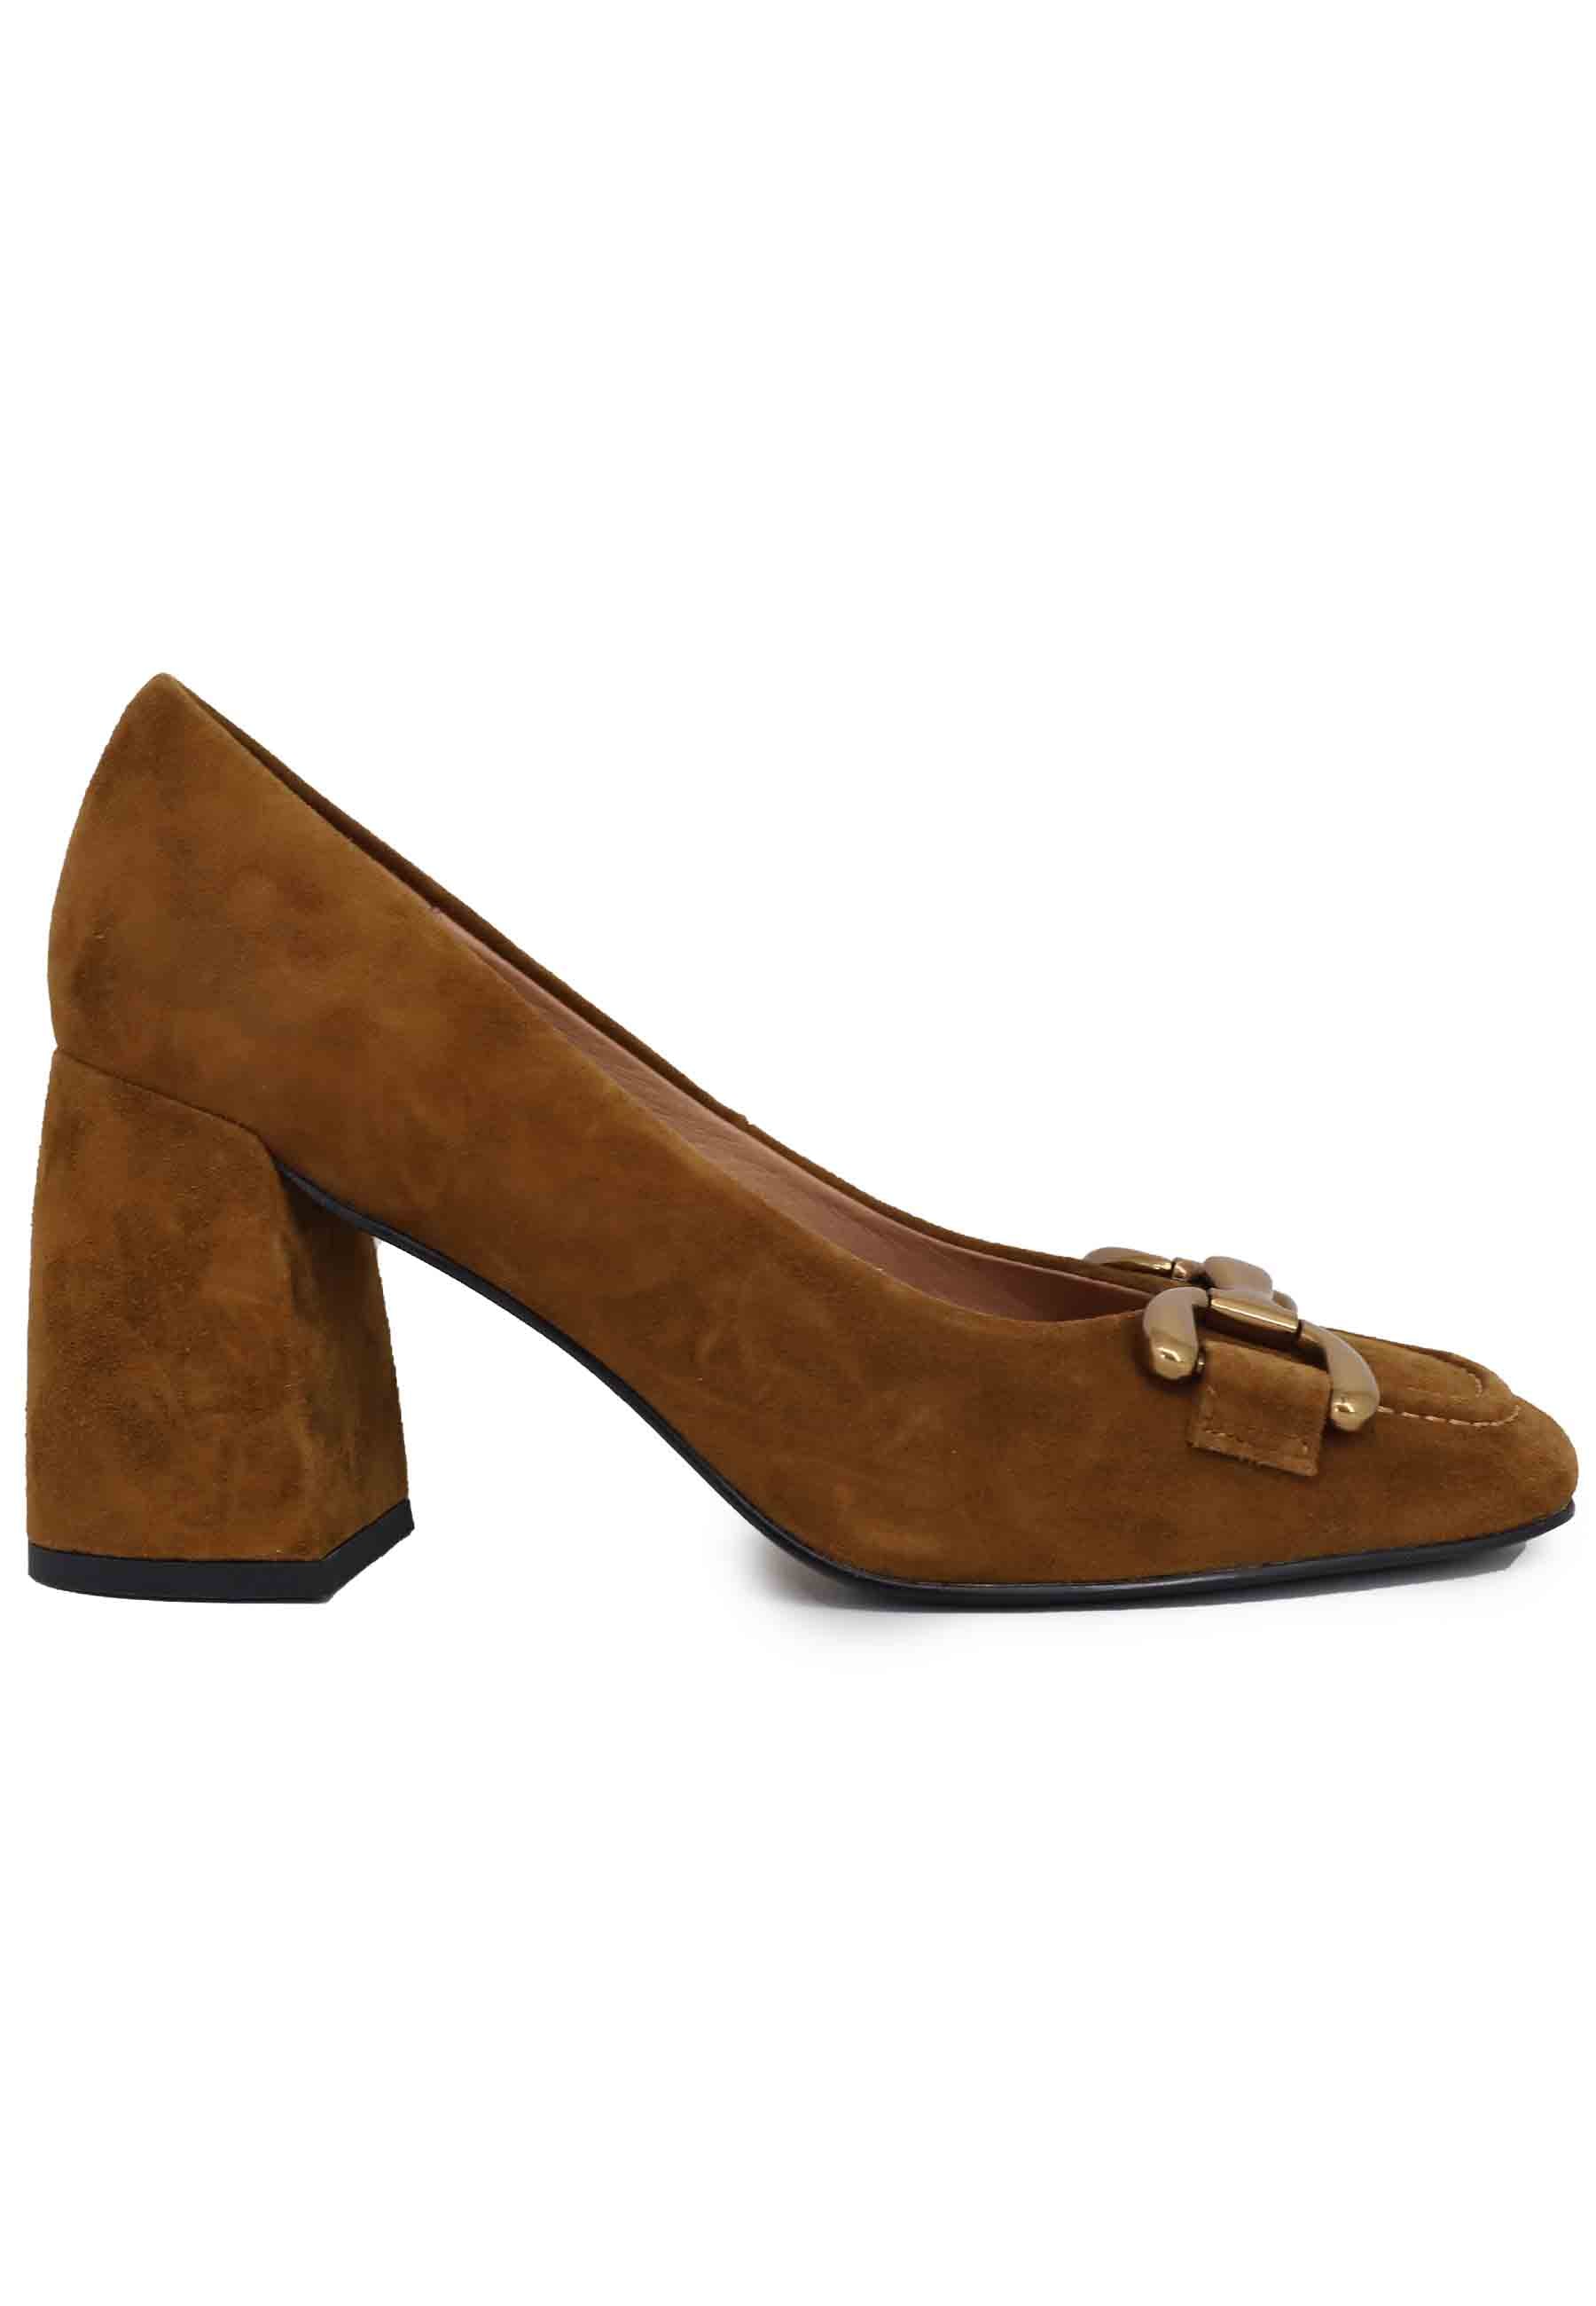 Women's pumps in leather suede with high heel Amber